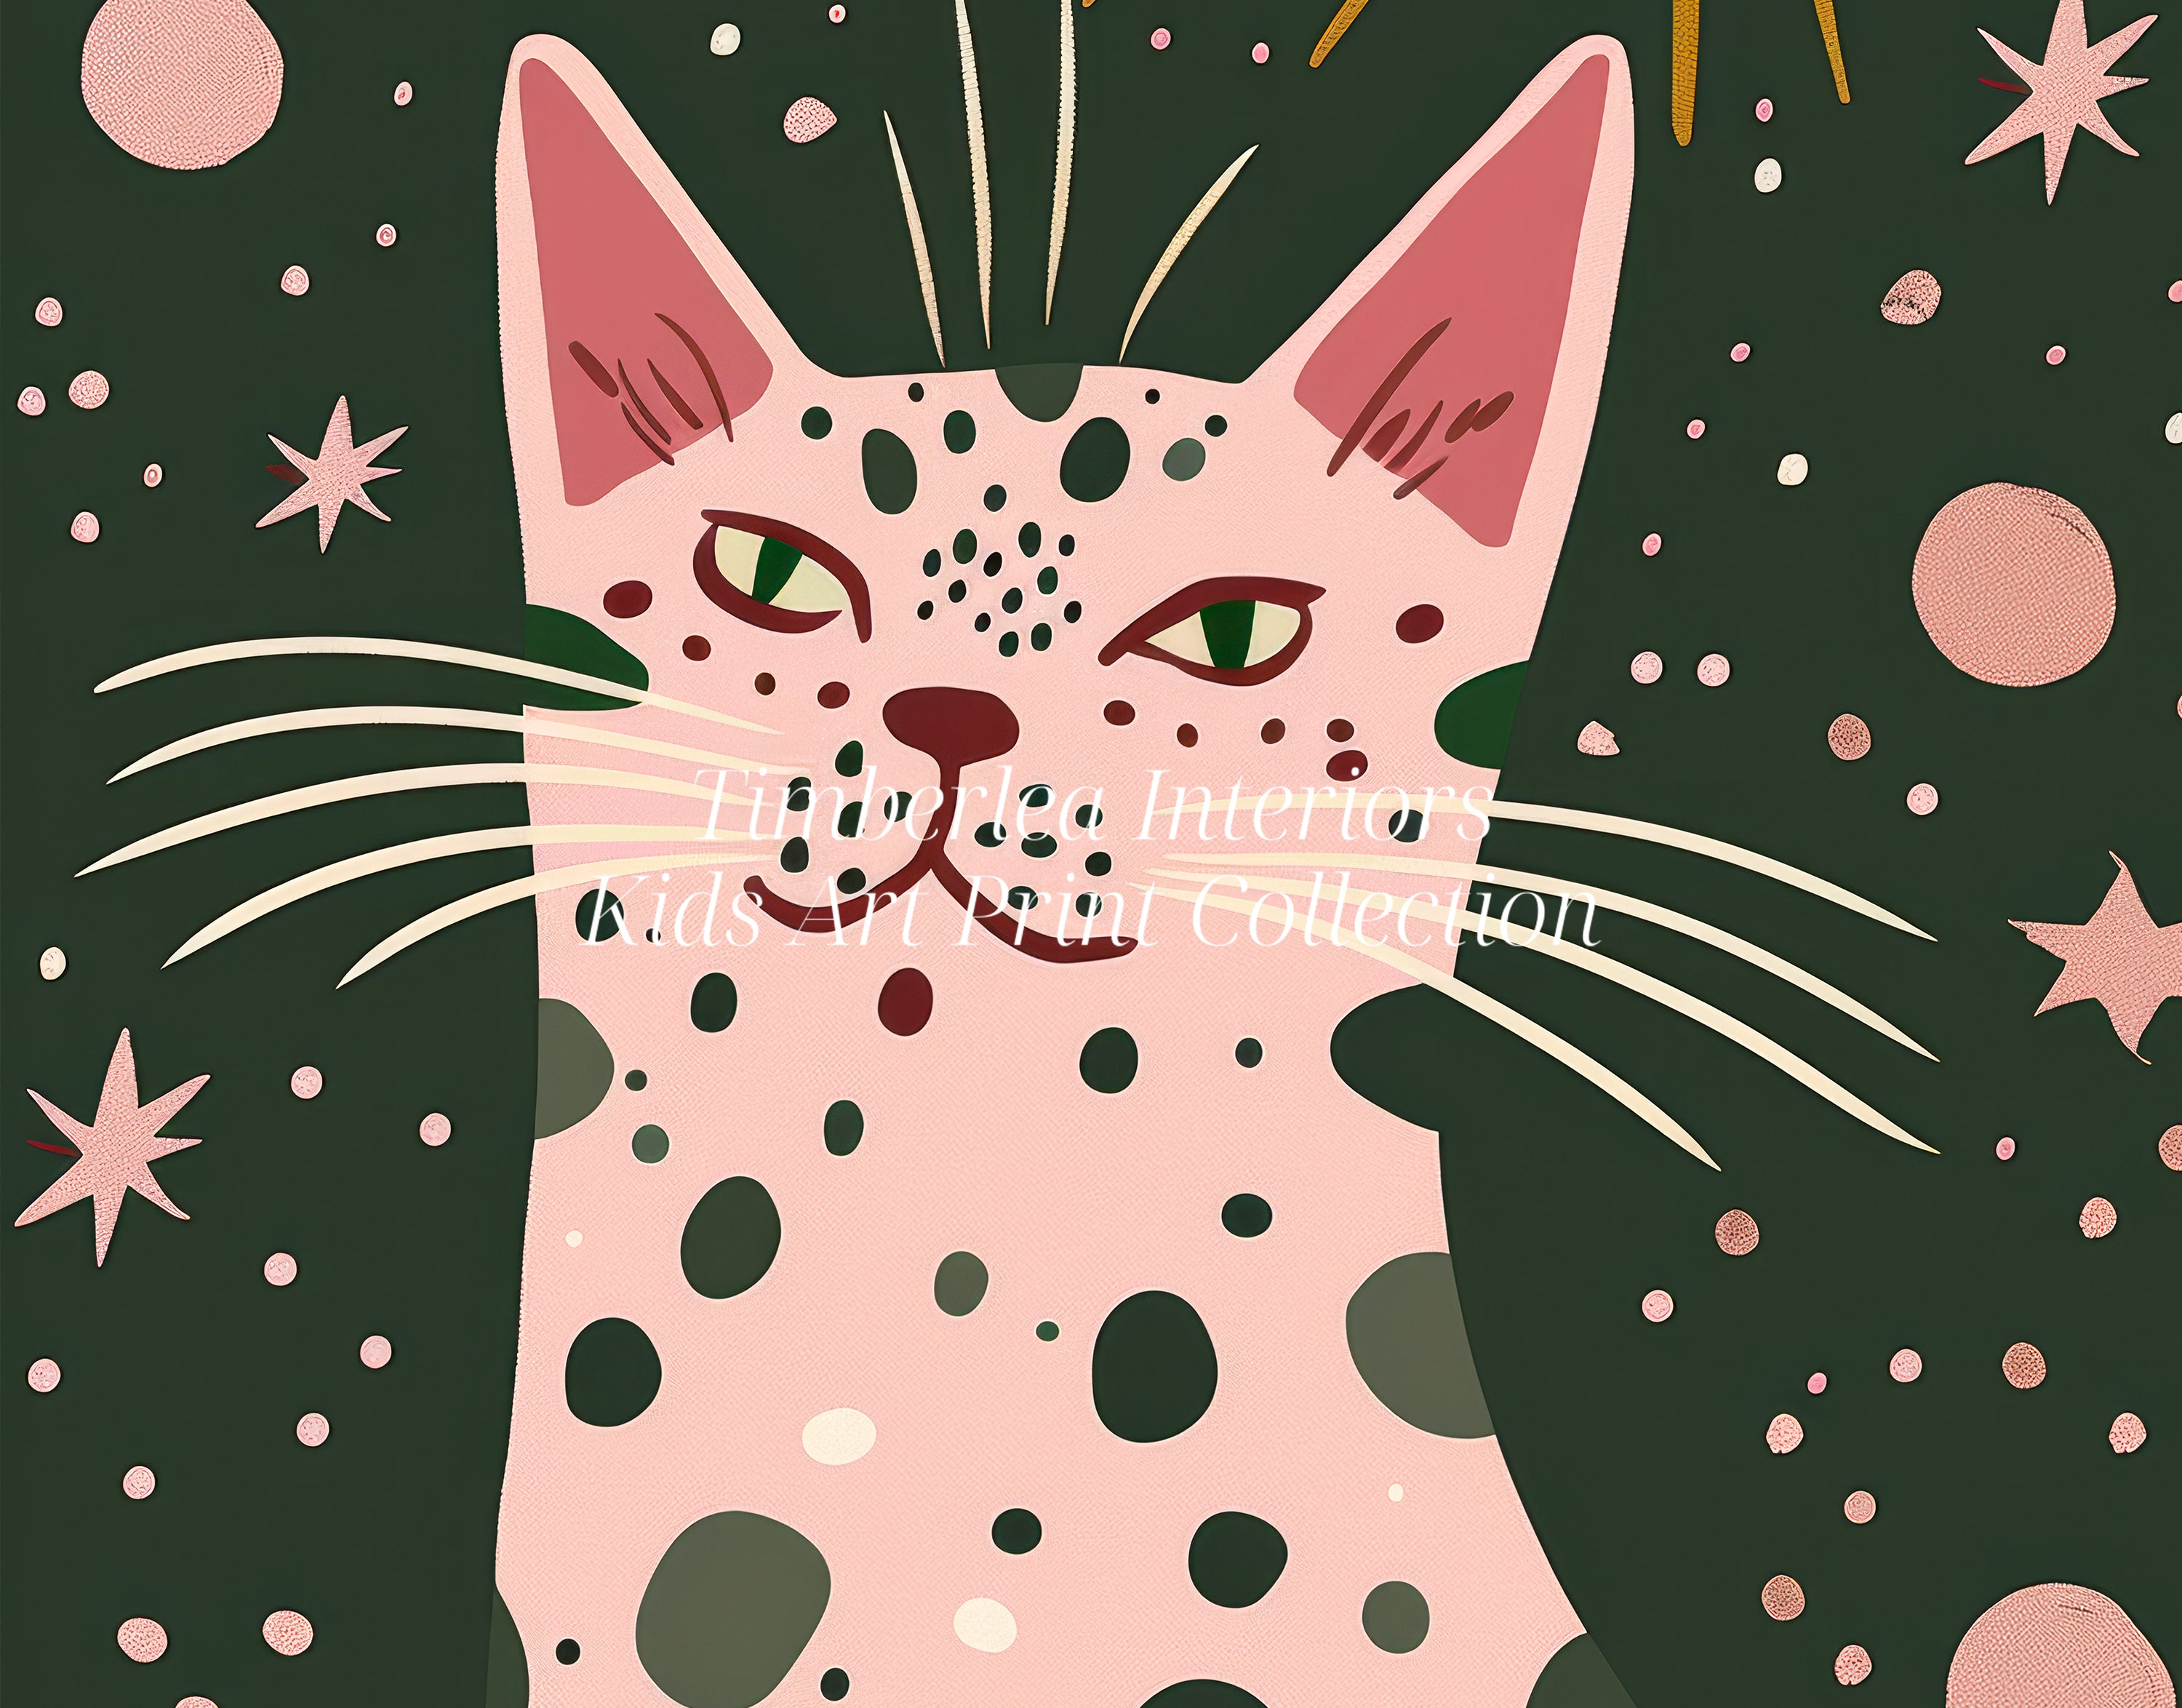 Close-up view of the Galactic Cat Art Print featuring a charming pink cat with green eyes and black spots against a dark green background with stars, planets, and a golden sun